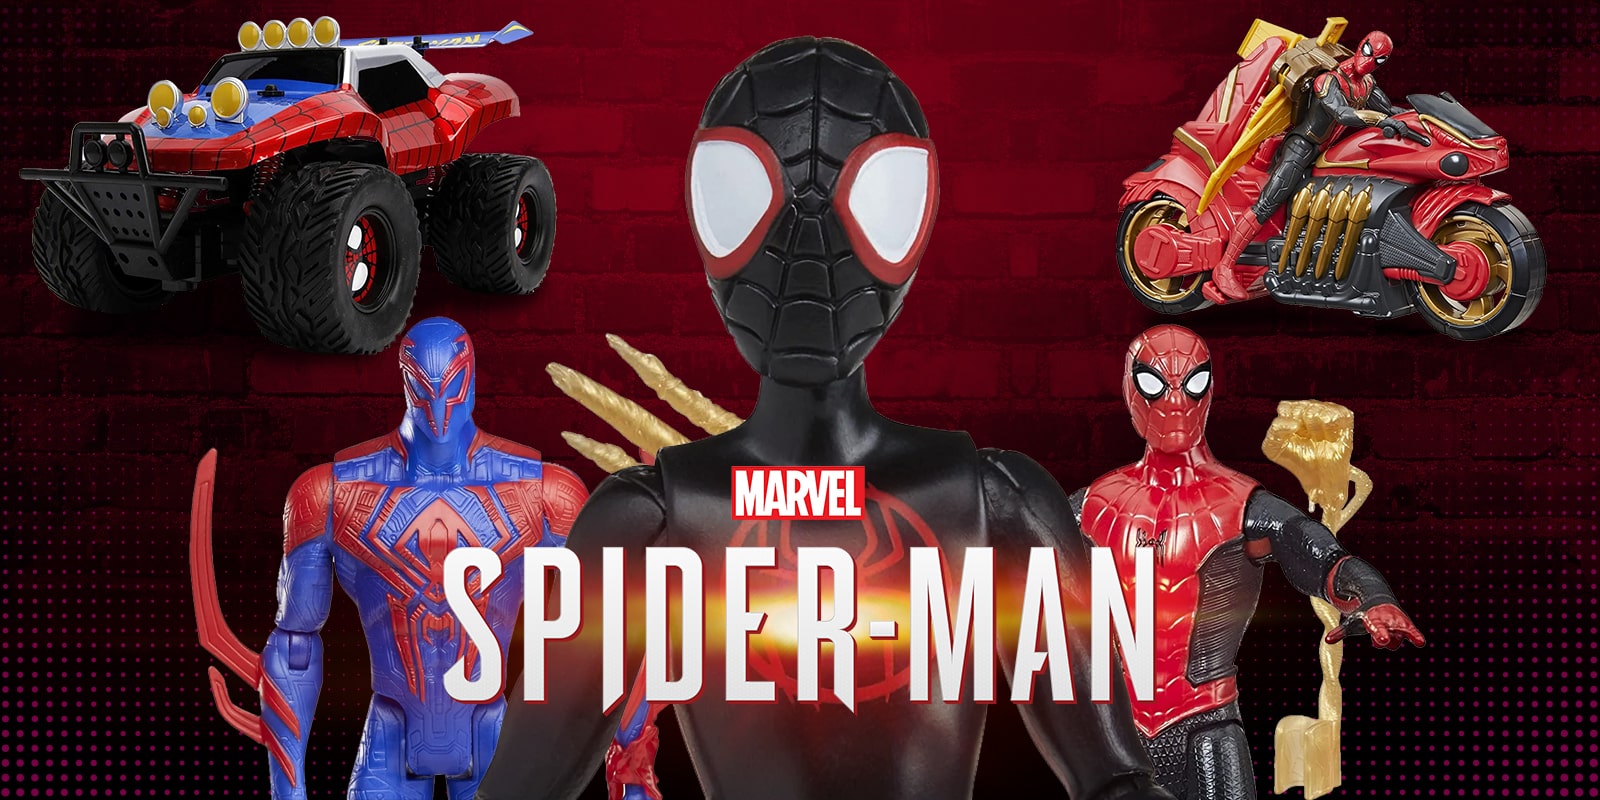 Marvel Spider-Man: Across the Spider-Verse Spider-Punk Web Blast Guitar,  Fun Musical Roleplay Toy for Kids Ages 5 and Up - Marvel